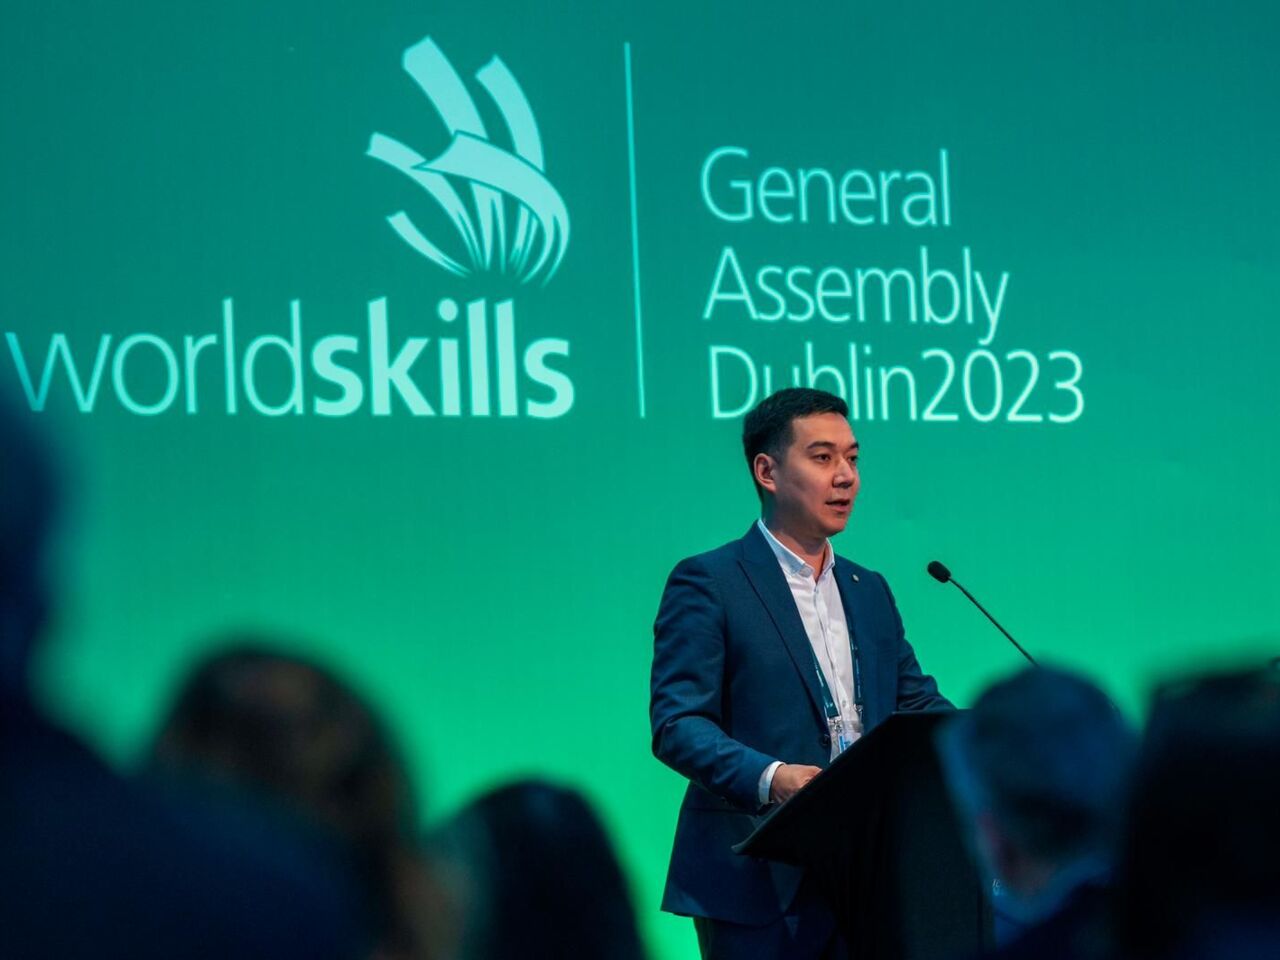 WorldSkills General Assembly 2025 to be held Croatia